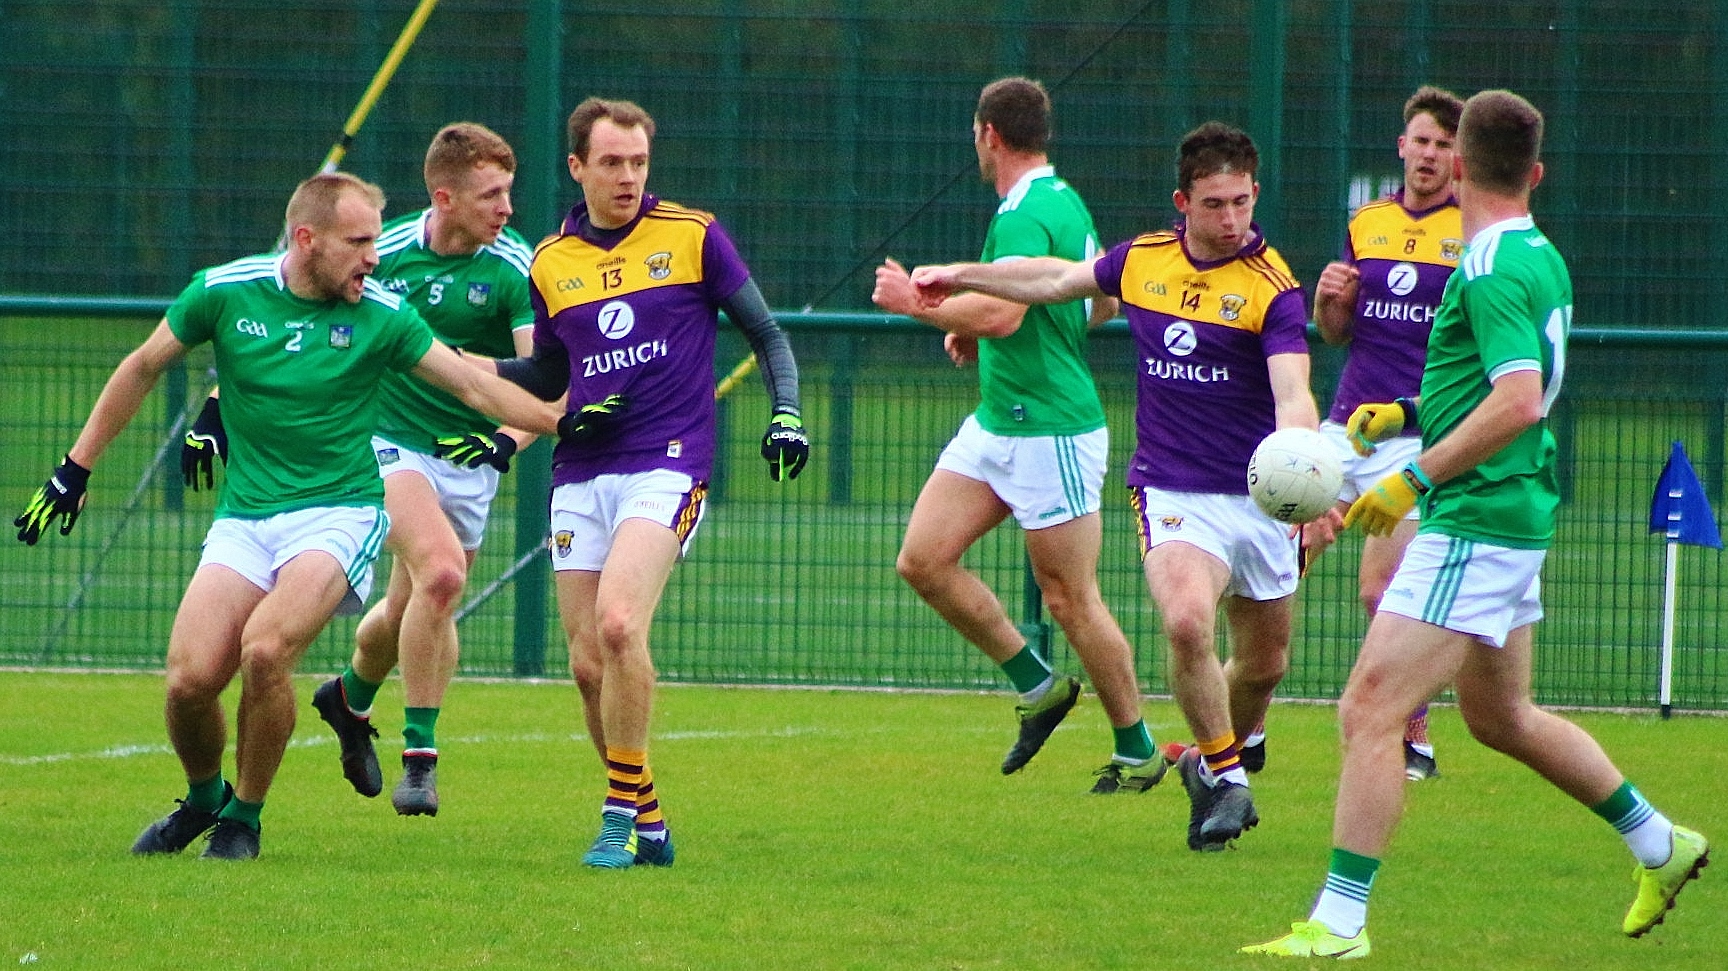 Wexford Footballers hold on to promotion hopes